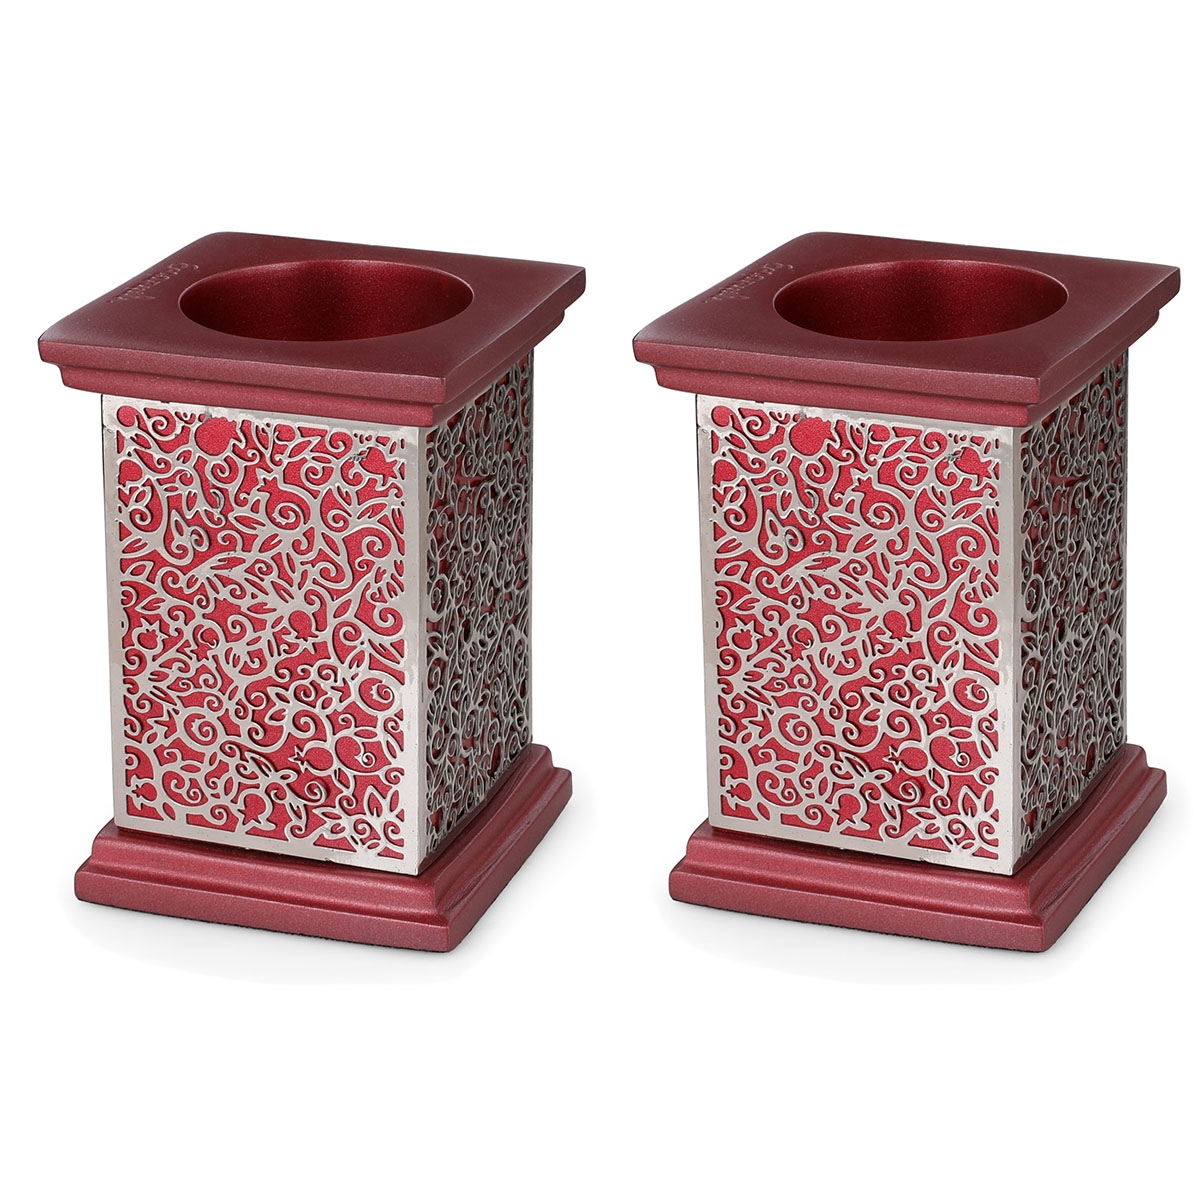 Yair Emanuel Anodized Aluminum Pomegranate Candlesticks with Laser-Cut Metal – Variety of Colors - 1